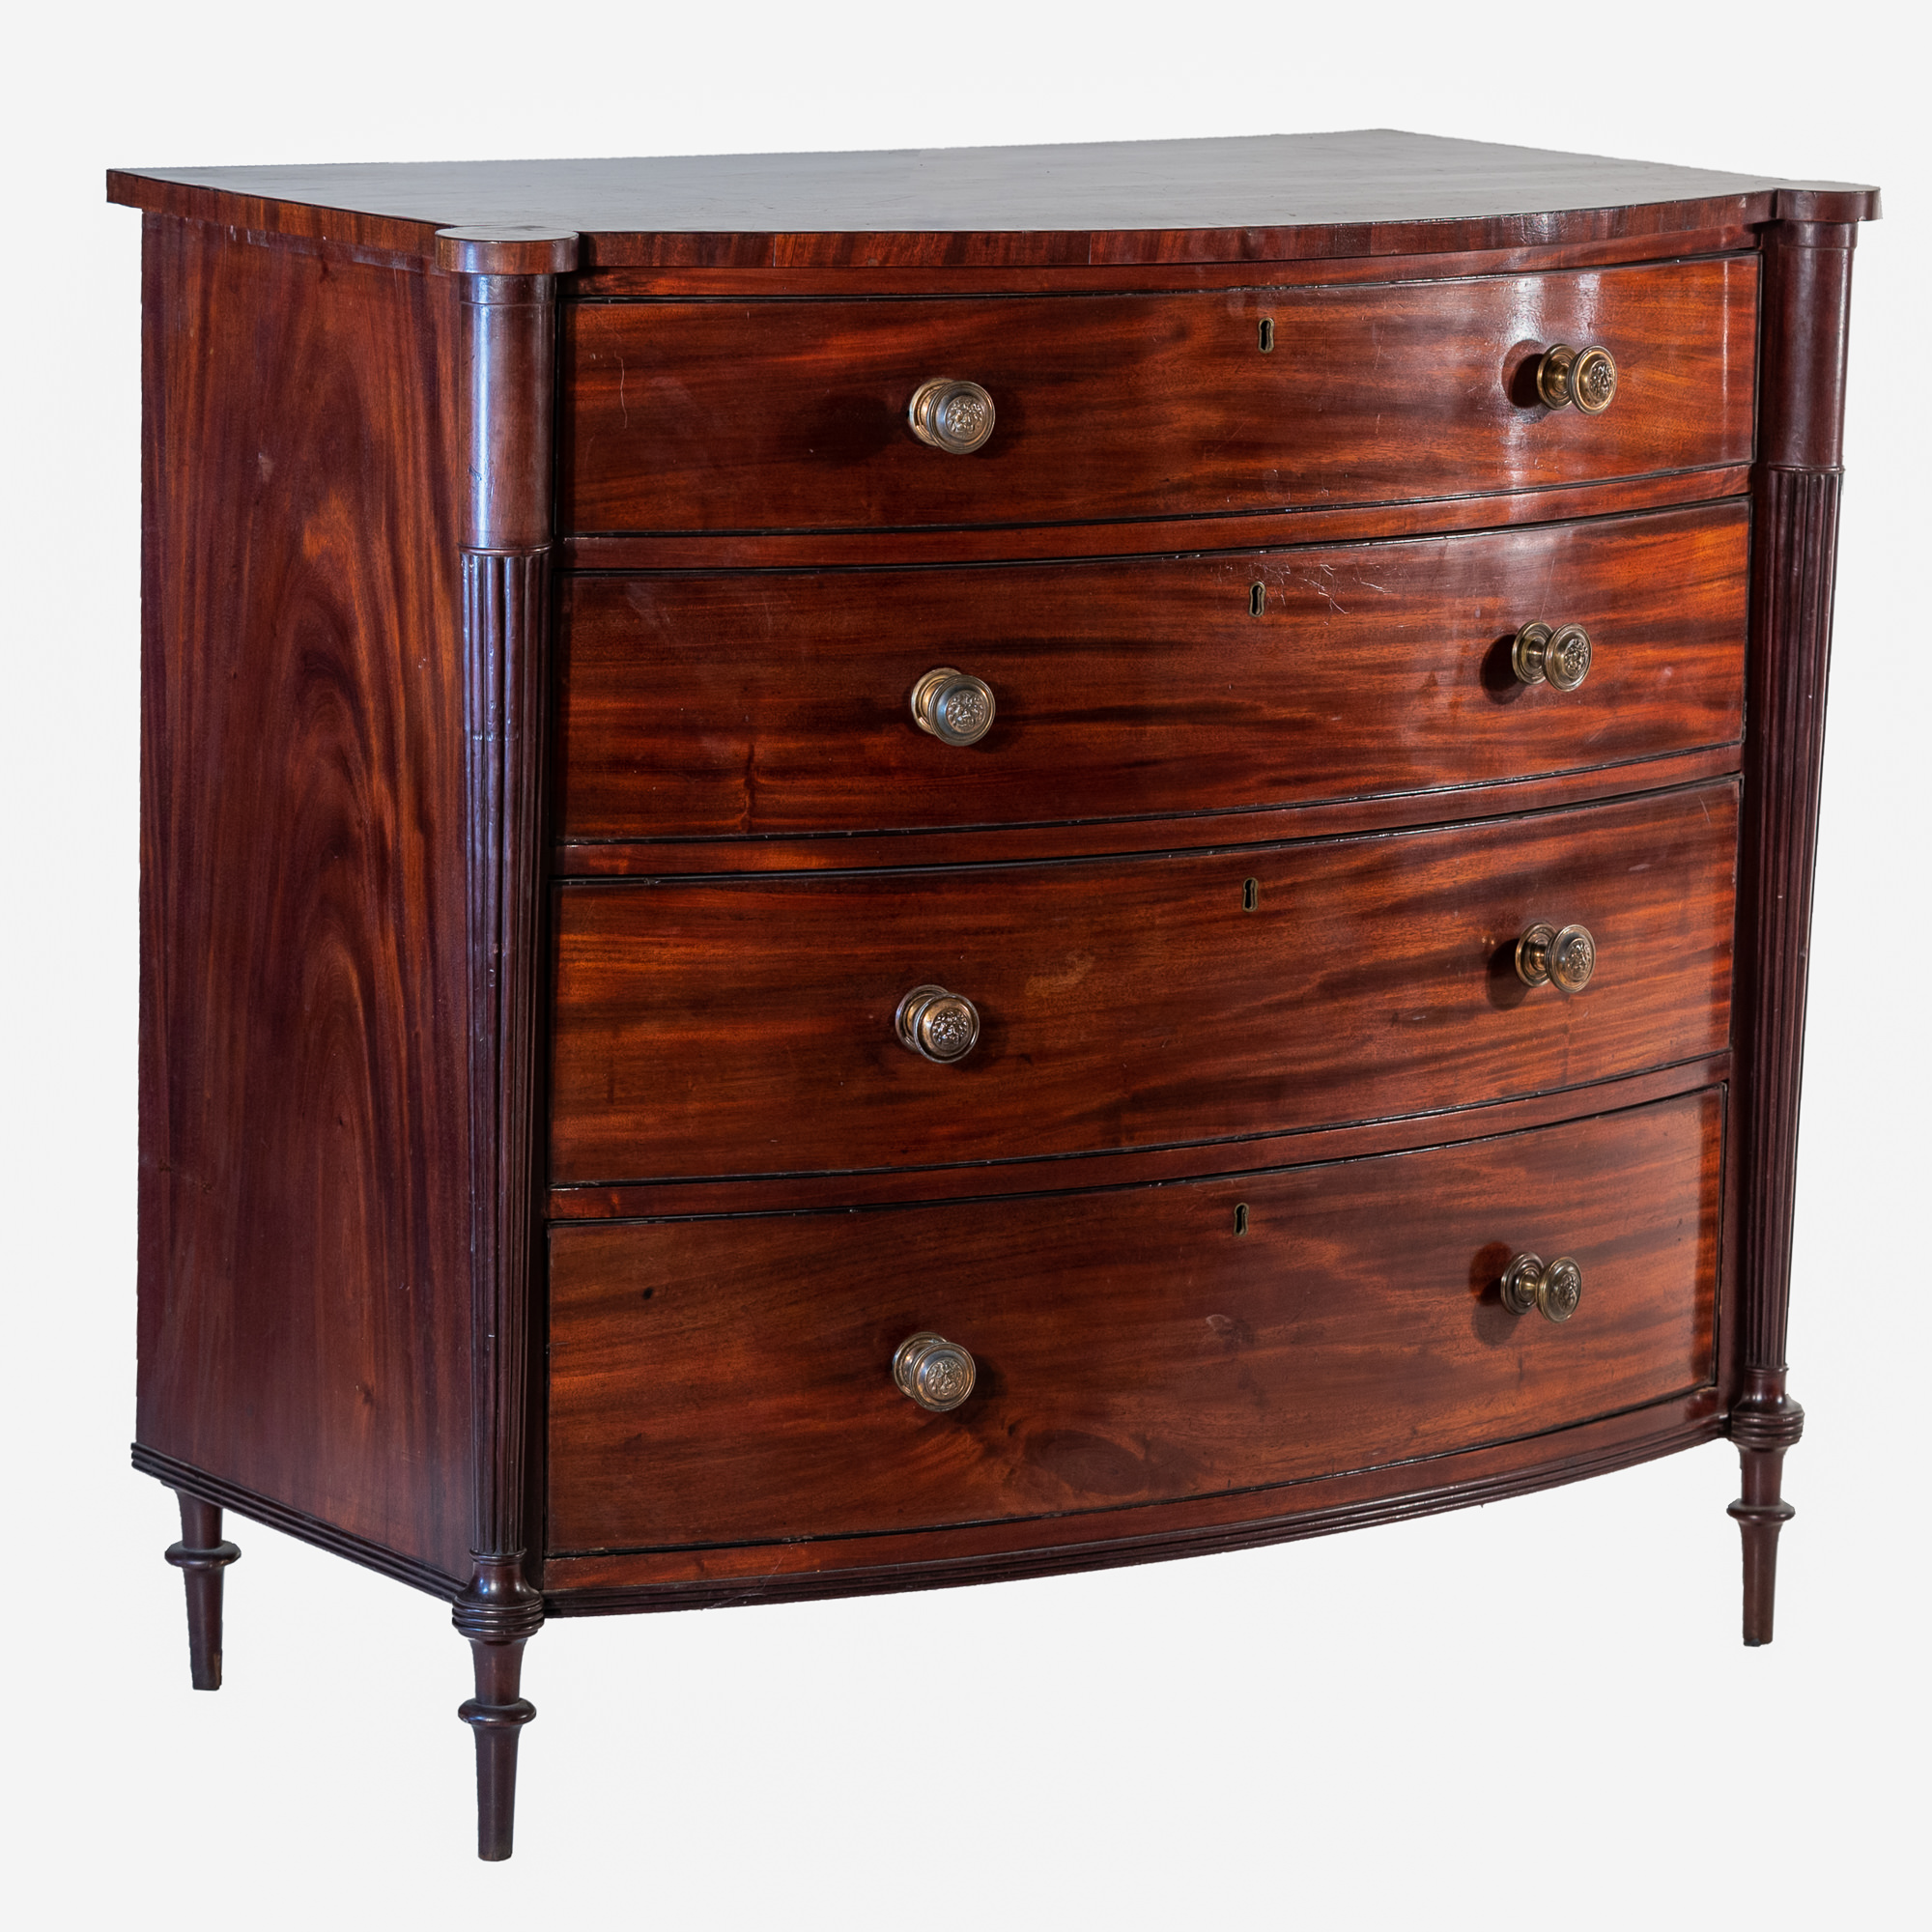 'Regency Mahogany and Ebony Strung Bowfront Chest with Tapered Fluted Pilasters in the Manner of Gillows Circa 1820'